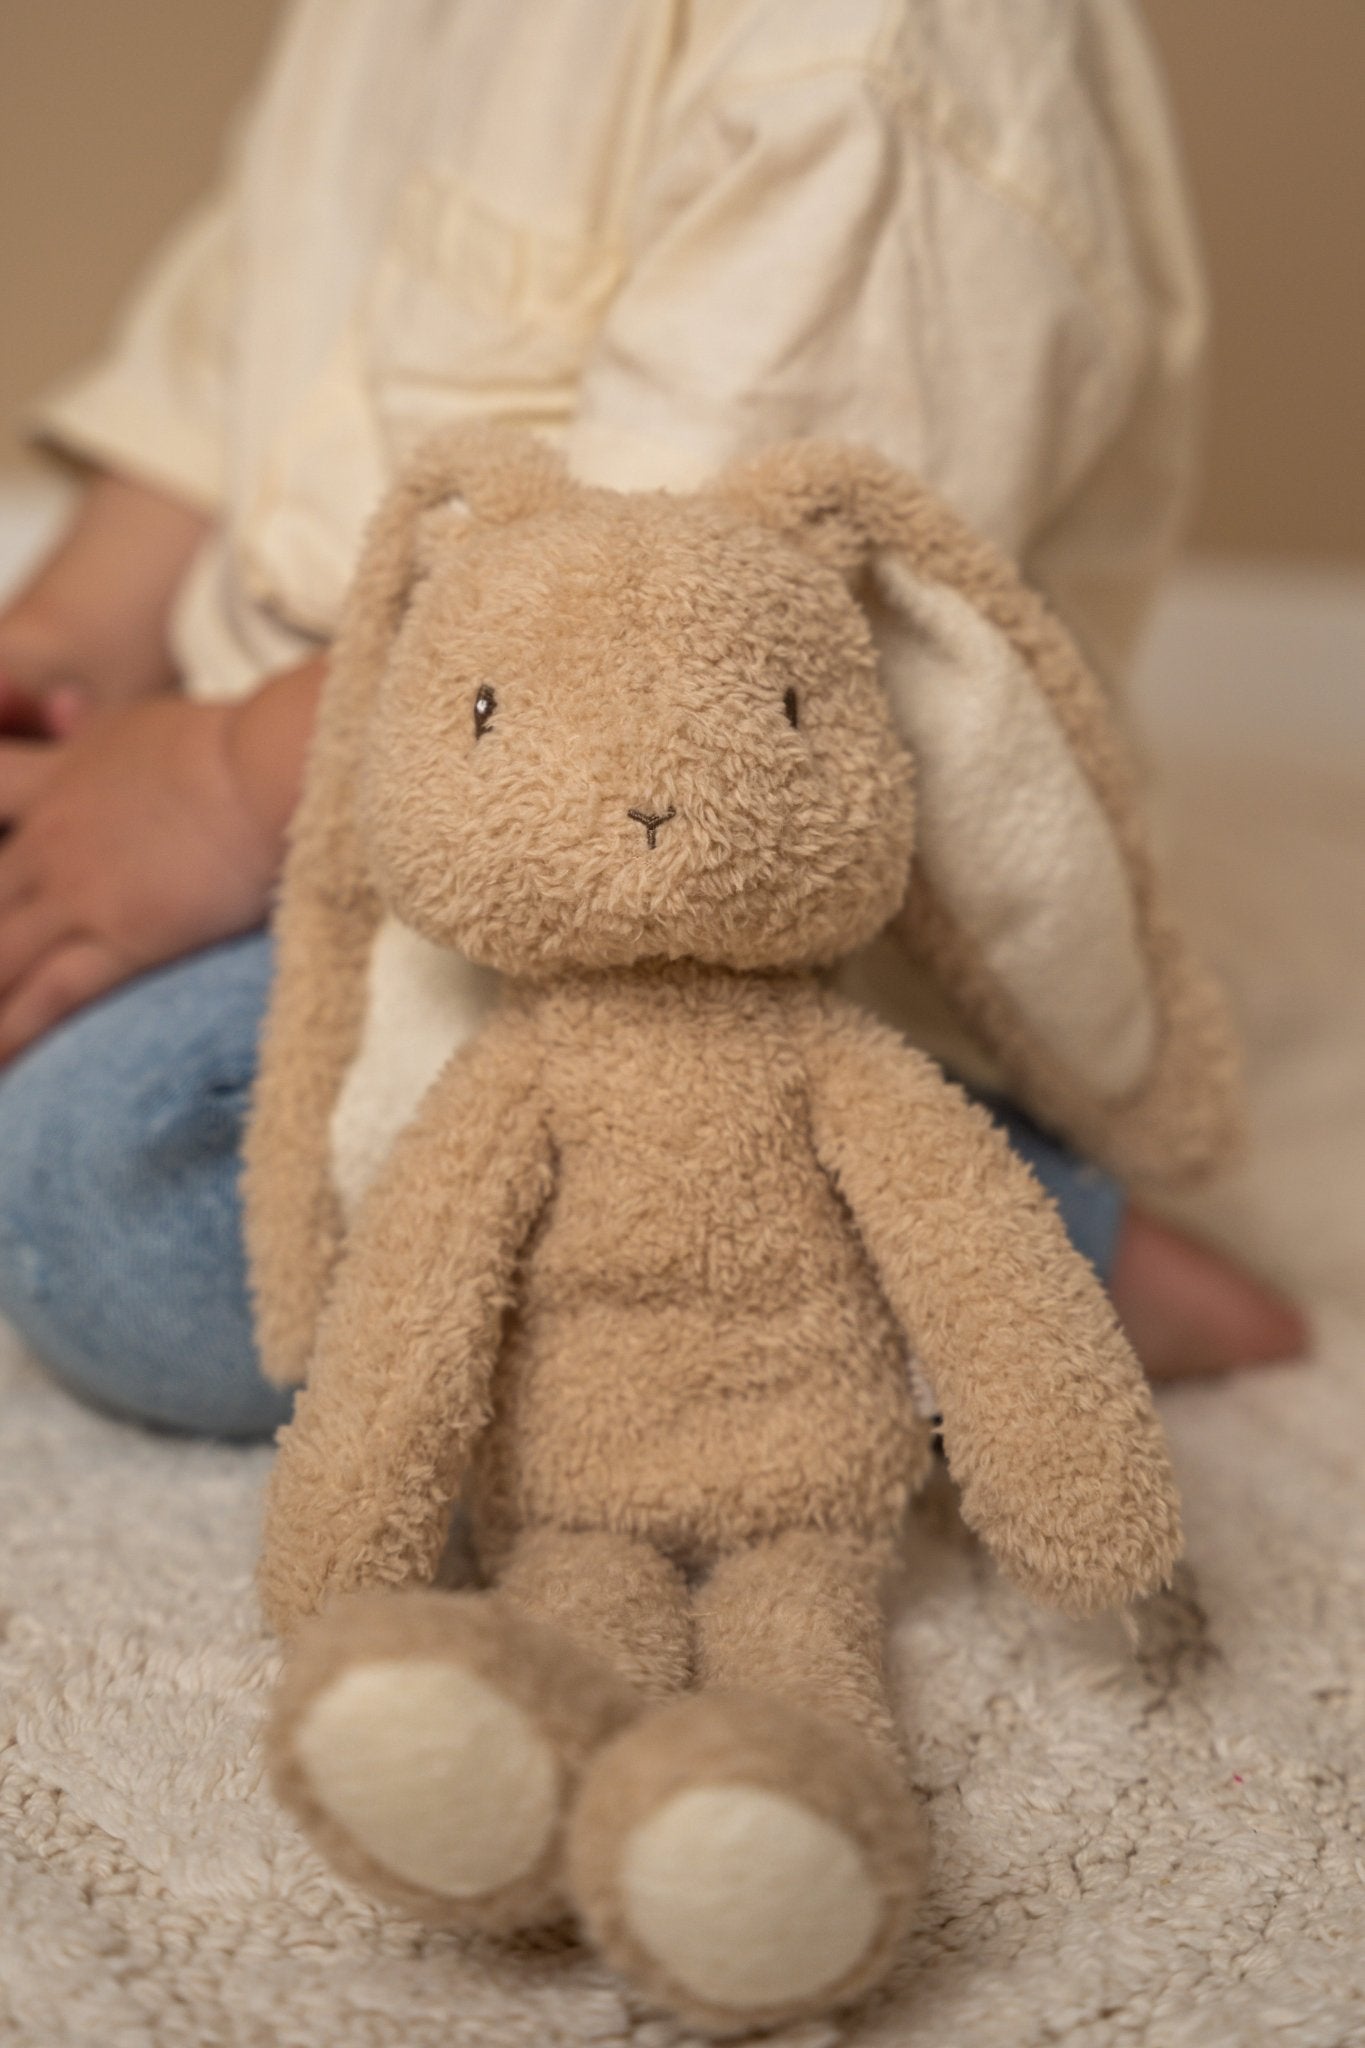 Peluche Lapin - Baby Bunny - Lina et Compagnie